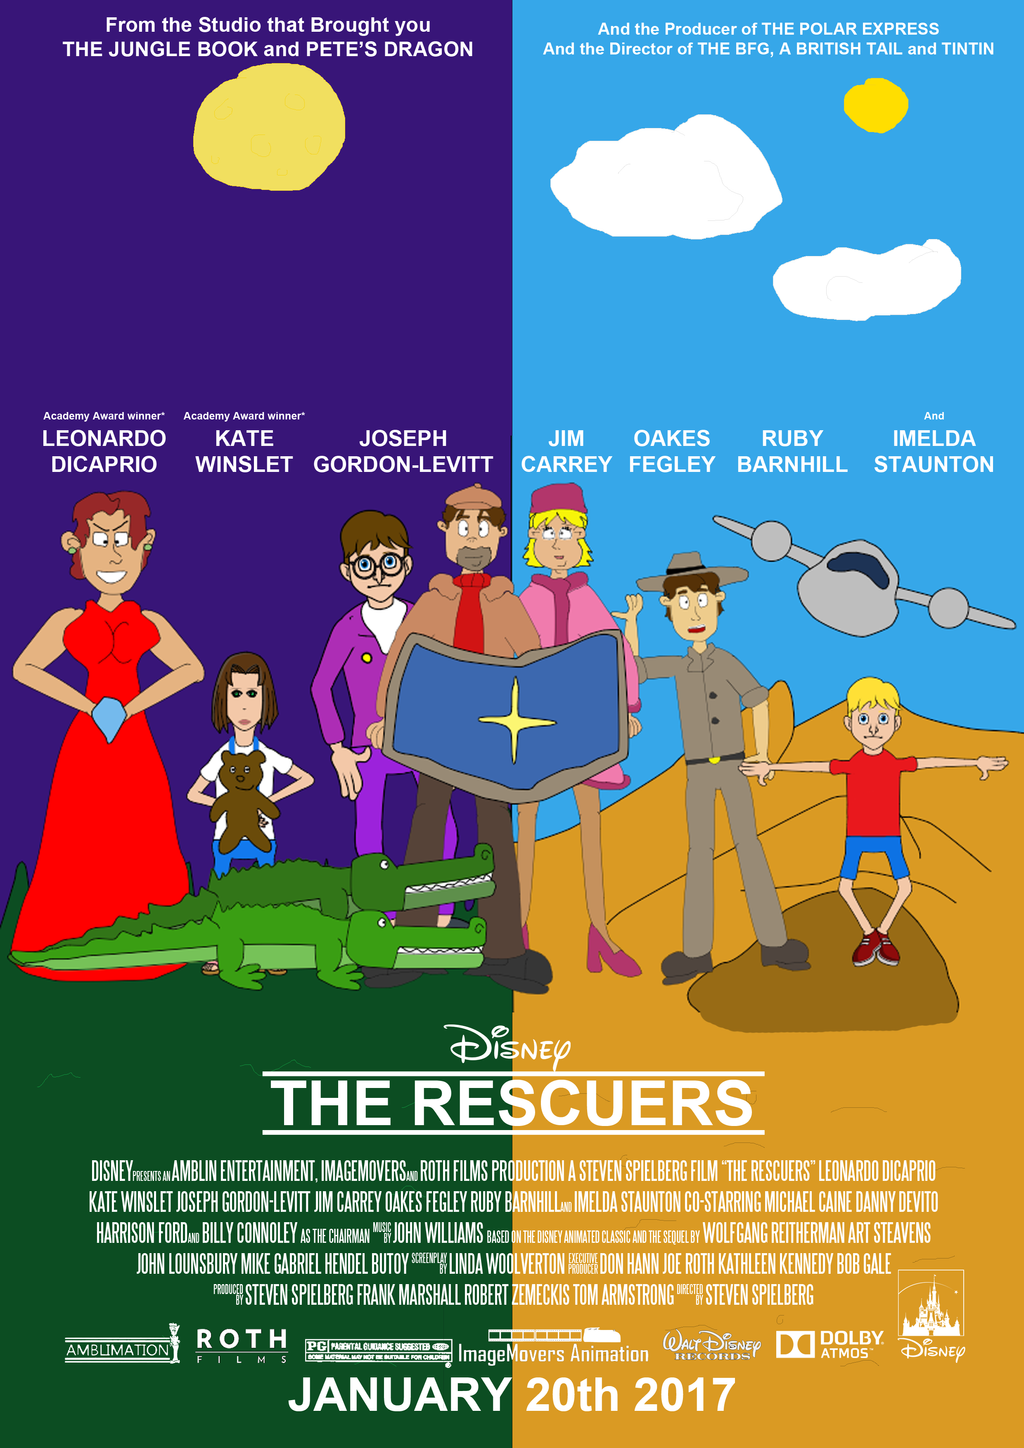 The Rescuers (2017 version) Poster by TomArmstrong20 on DeviantArt1024 x 1448